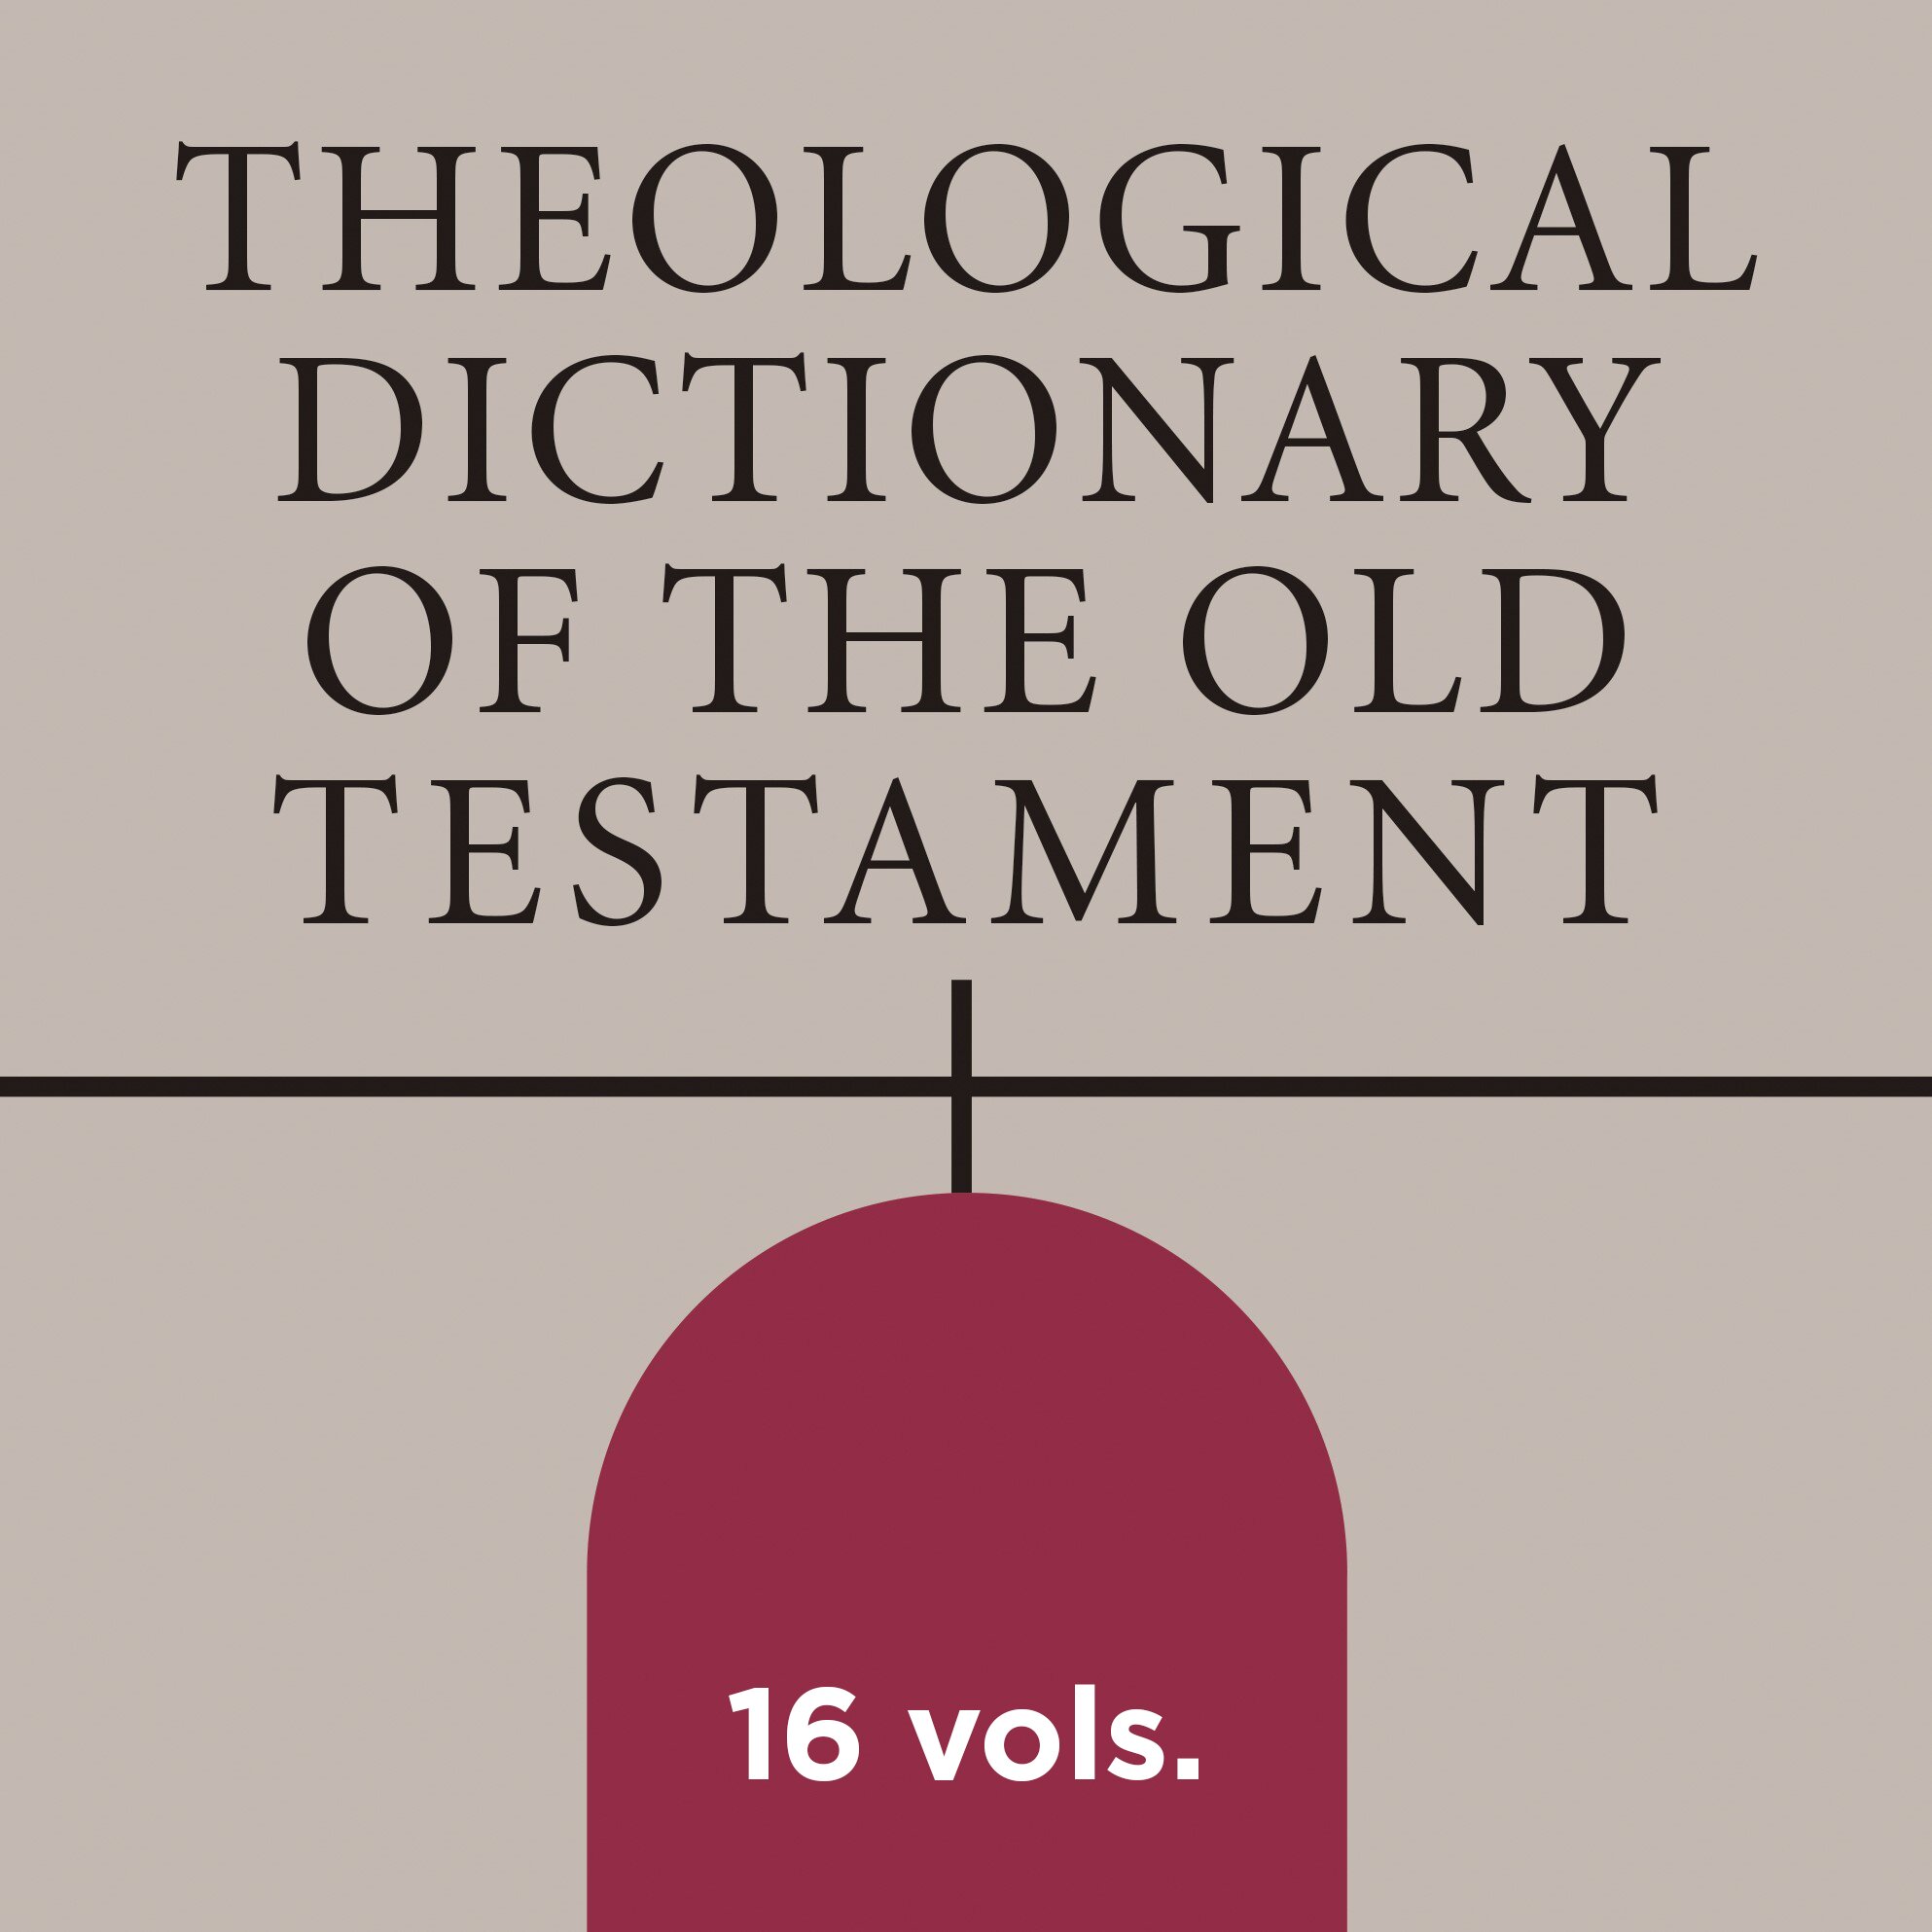 Theological Dictionary of the Old Testament | TDOT (16 vols.)